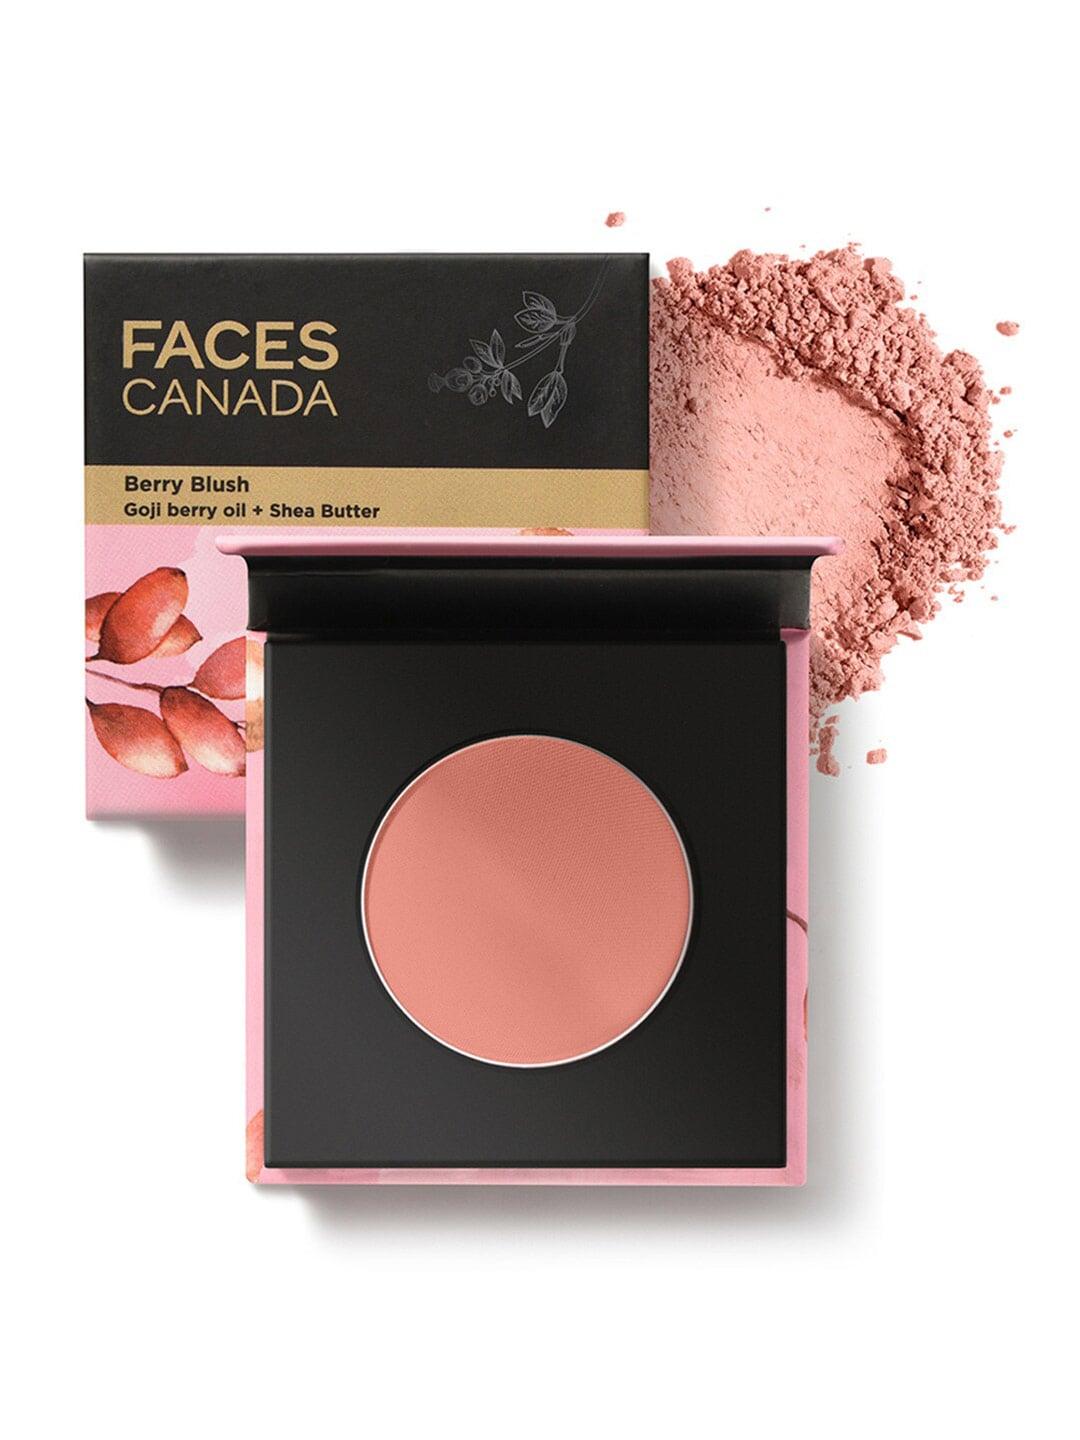 FACES CANADA Berry Blush with Goji Berry Oil & Shea Butter 4 g - Hugs & Kisses 05